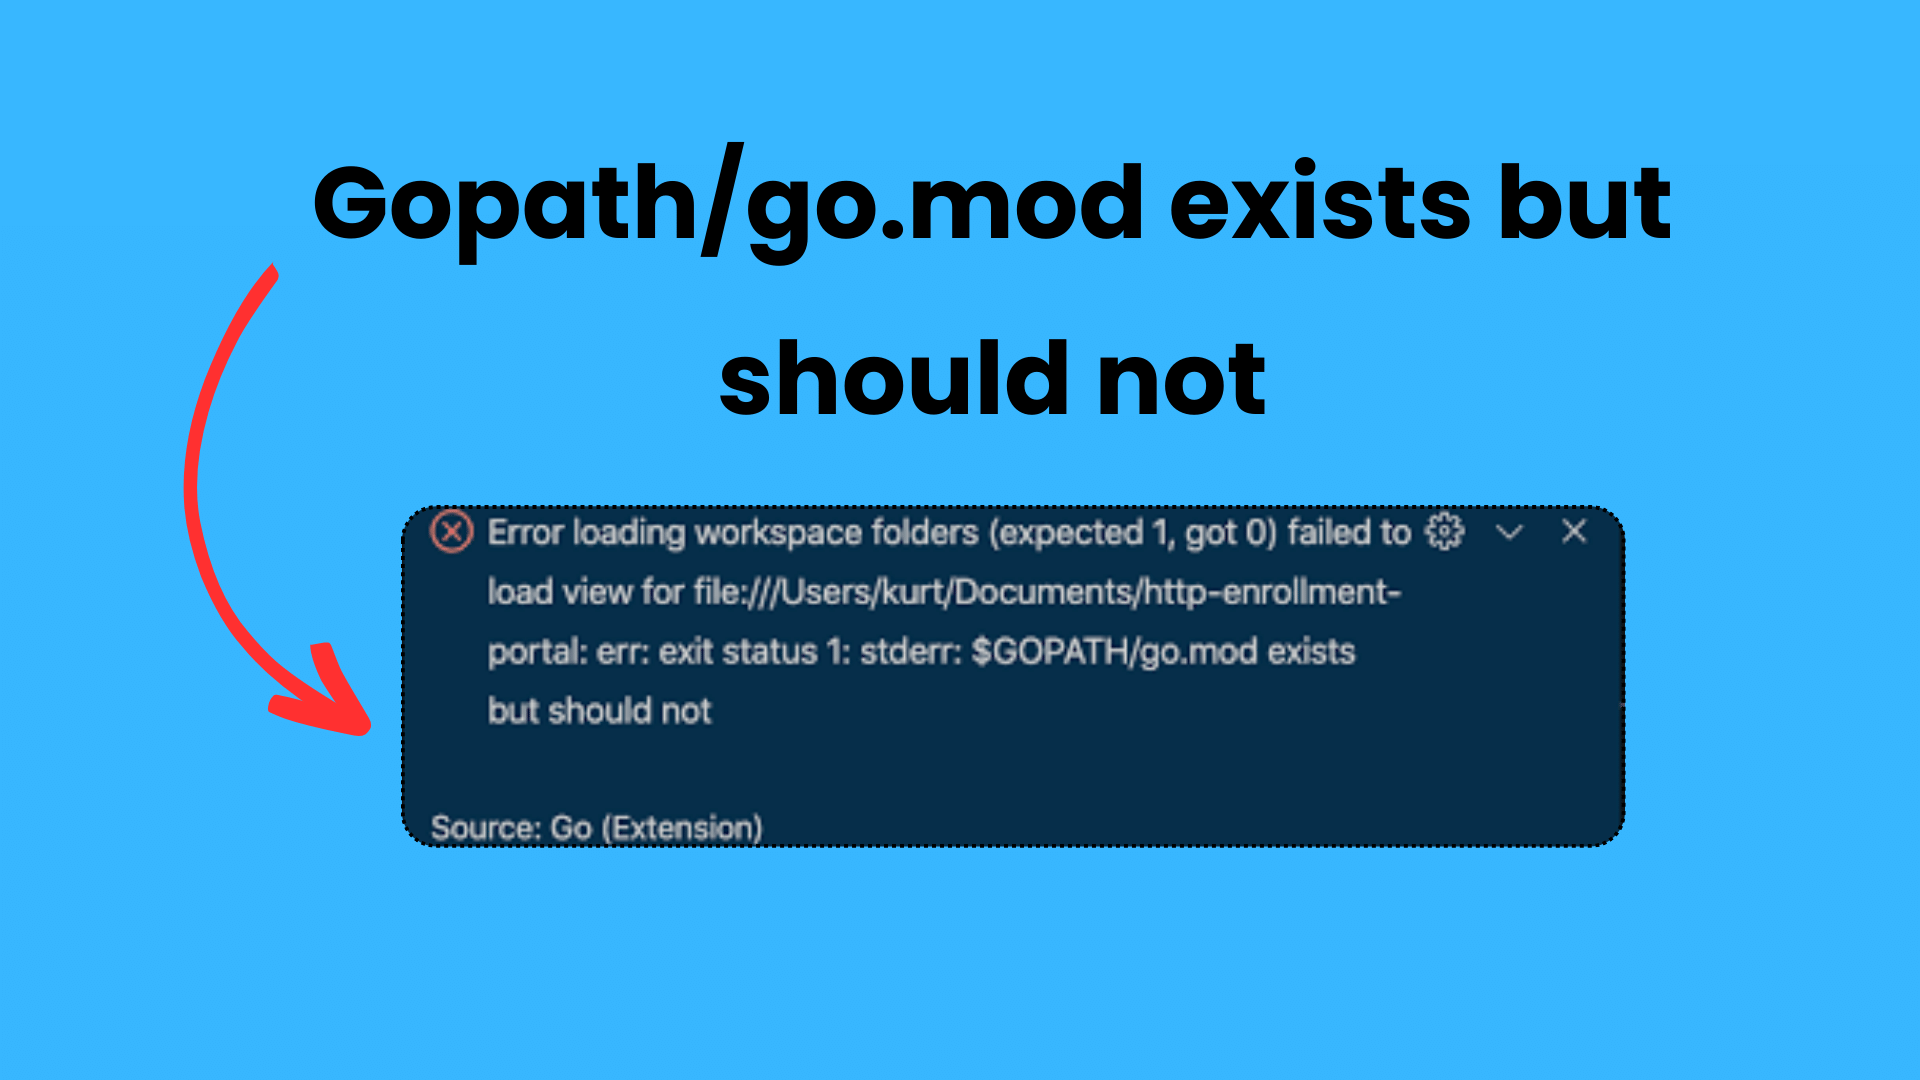 $gopath/go.mod exists but should not